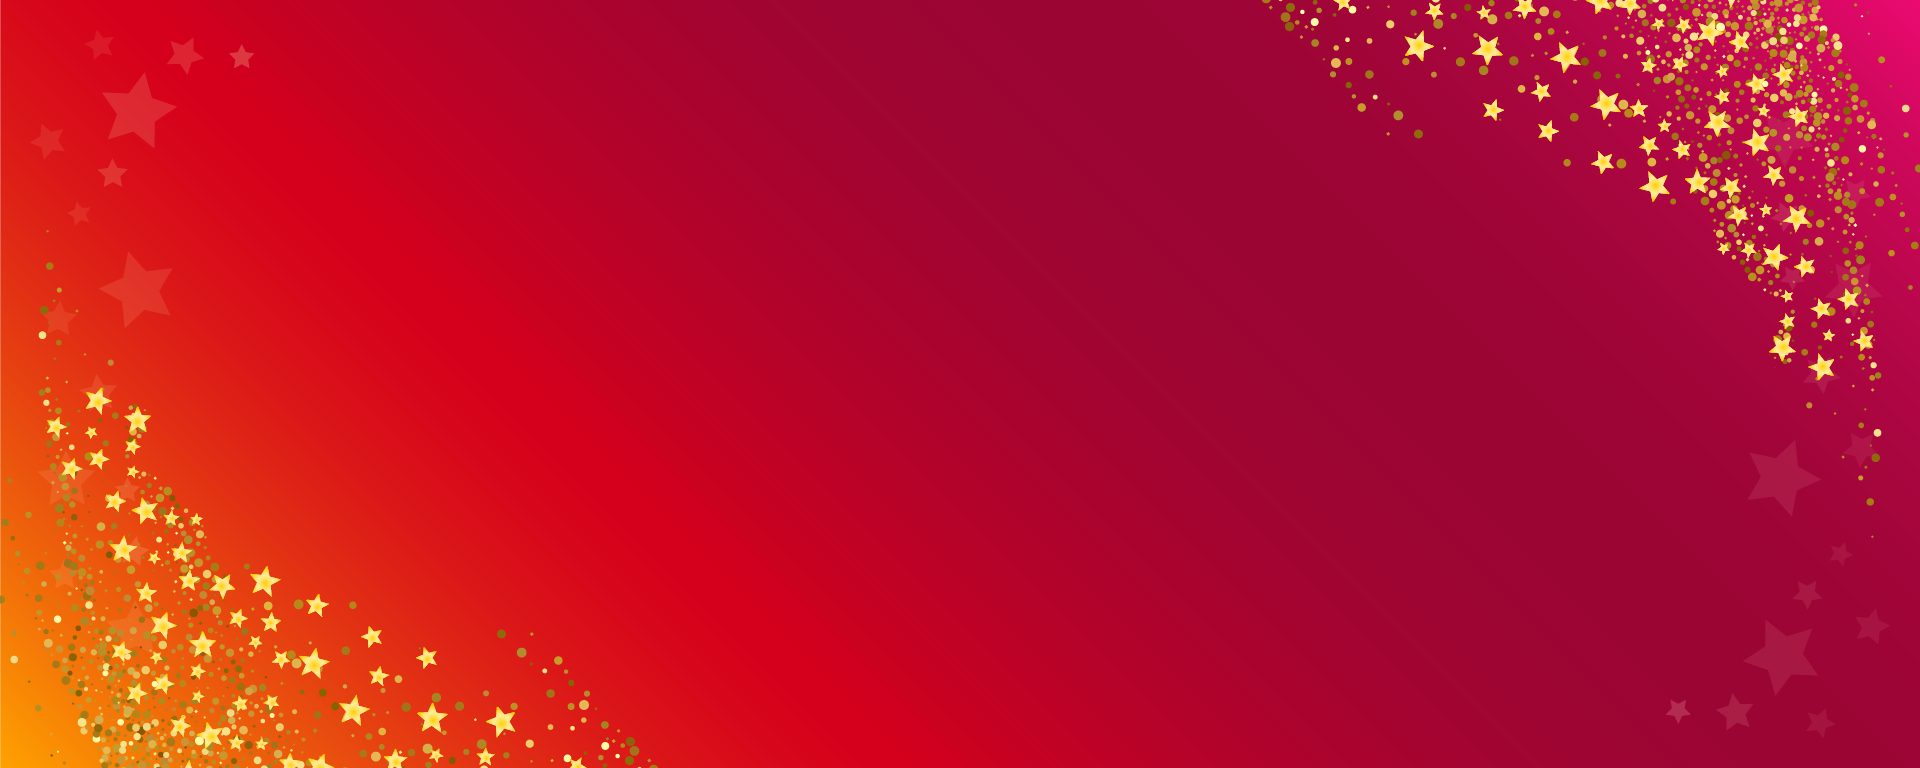 Orange and red background with gold stars on top